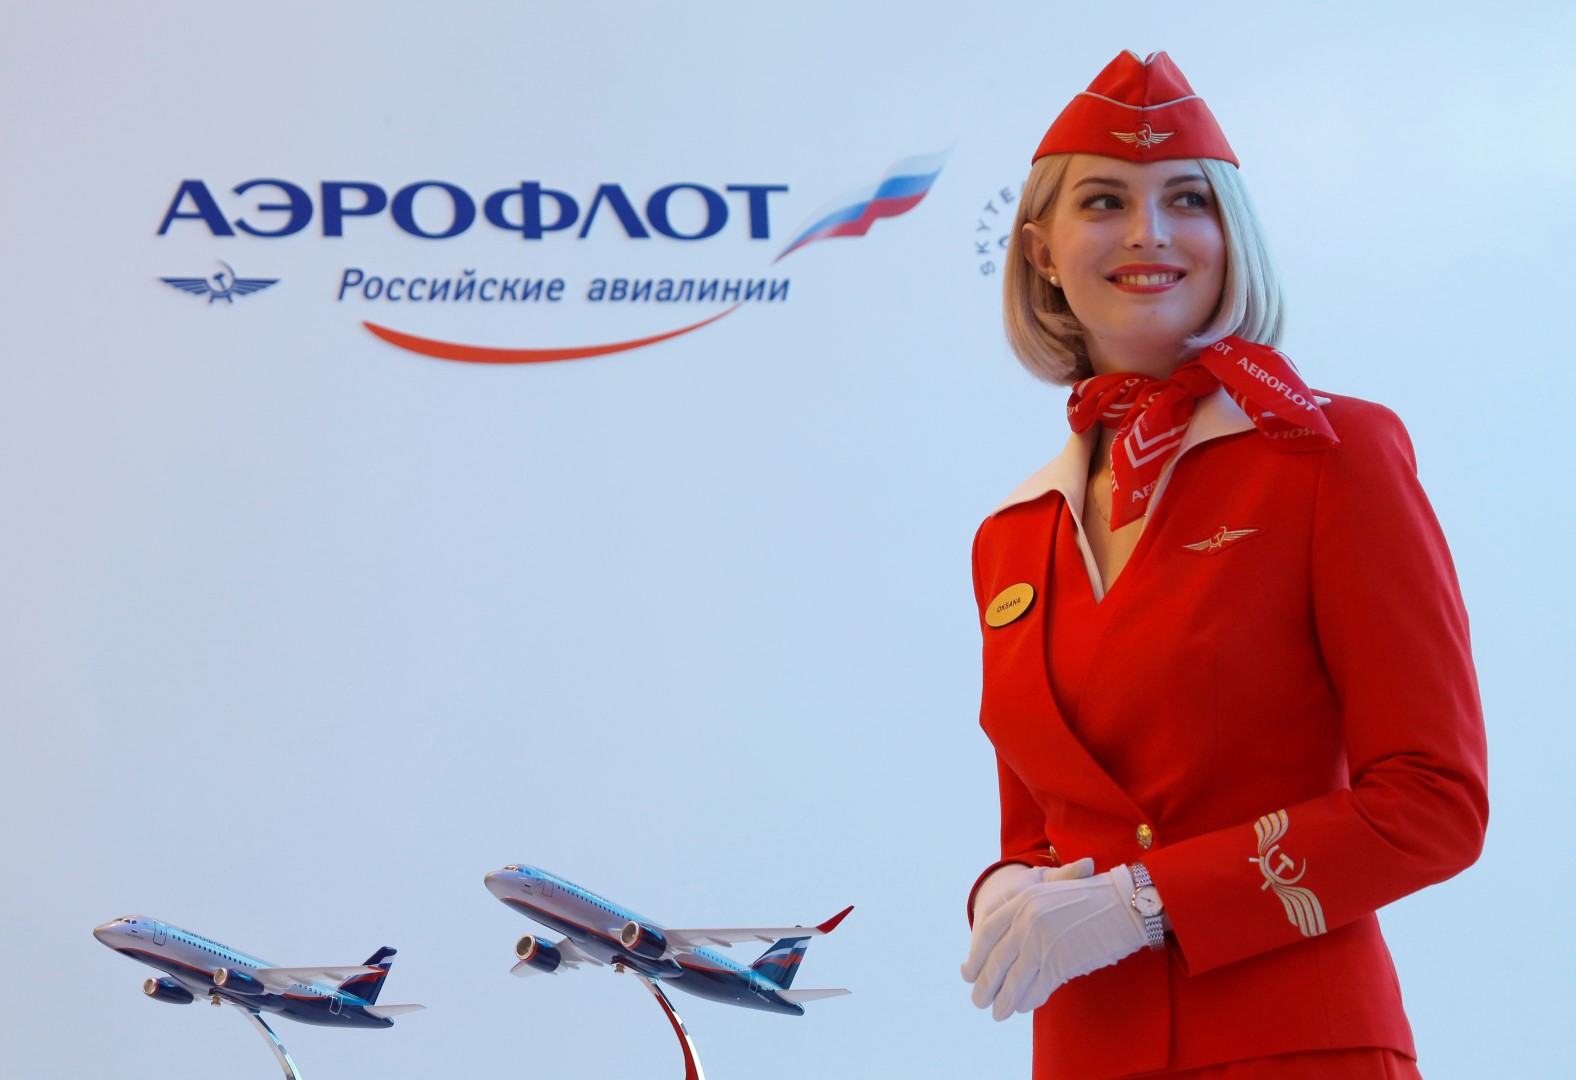 The logo of Russian state airline Aeroflot is pictured at the company's stand during the St. Petersburg International Economic Forum 2016 (SPIEF 2016) in St. Petersburg, Russia, June 17, 2016. REUTERS/Sergei Karpukhin - RTX2IHJ4